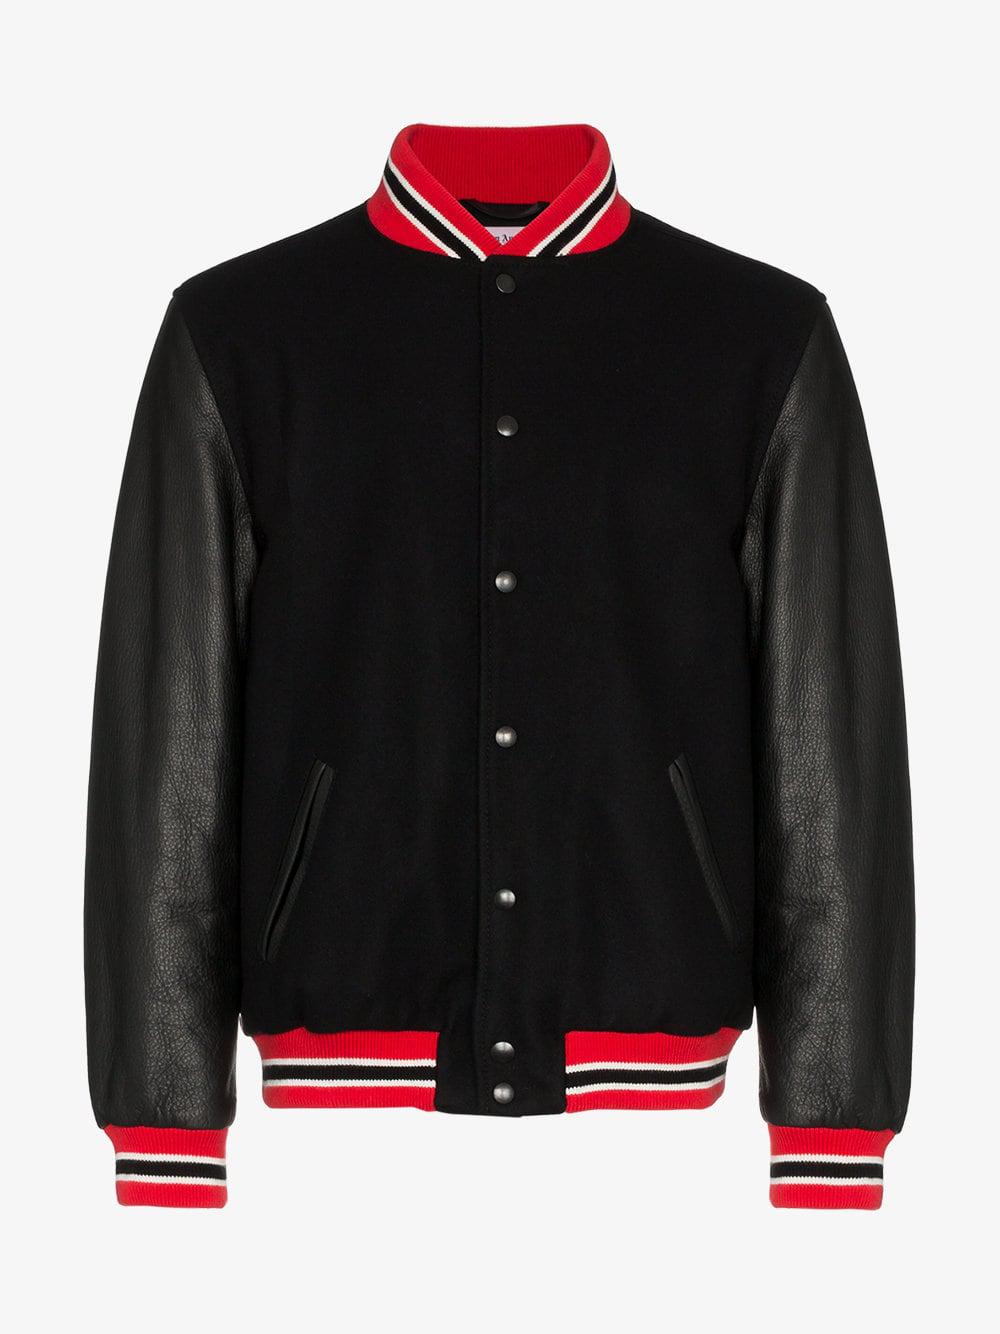 Palm Angels Leather Authentic Varsity Jacket in Black for Men - Lyst